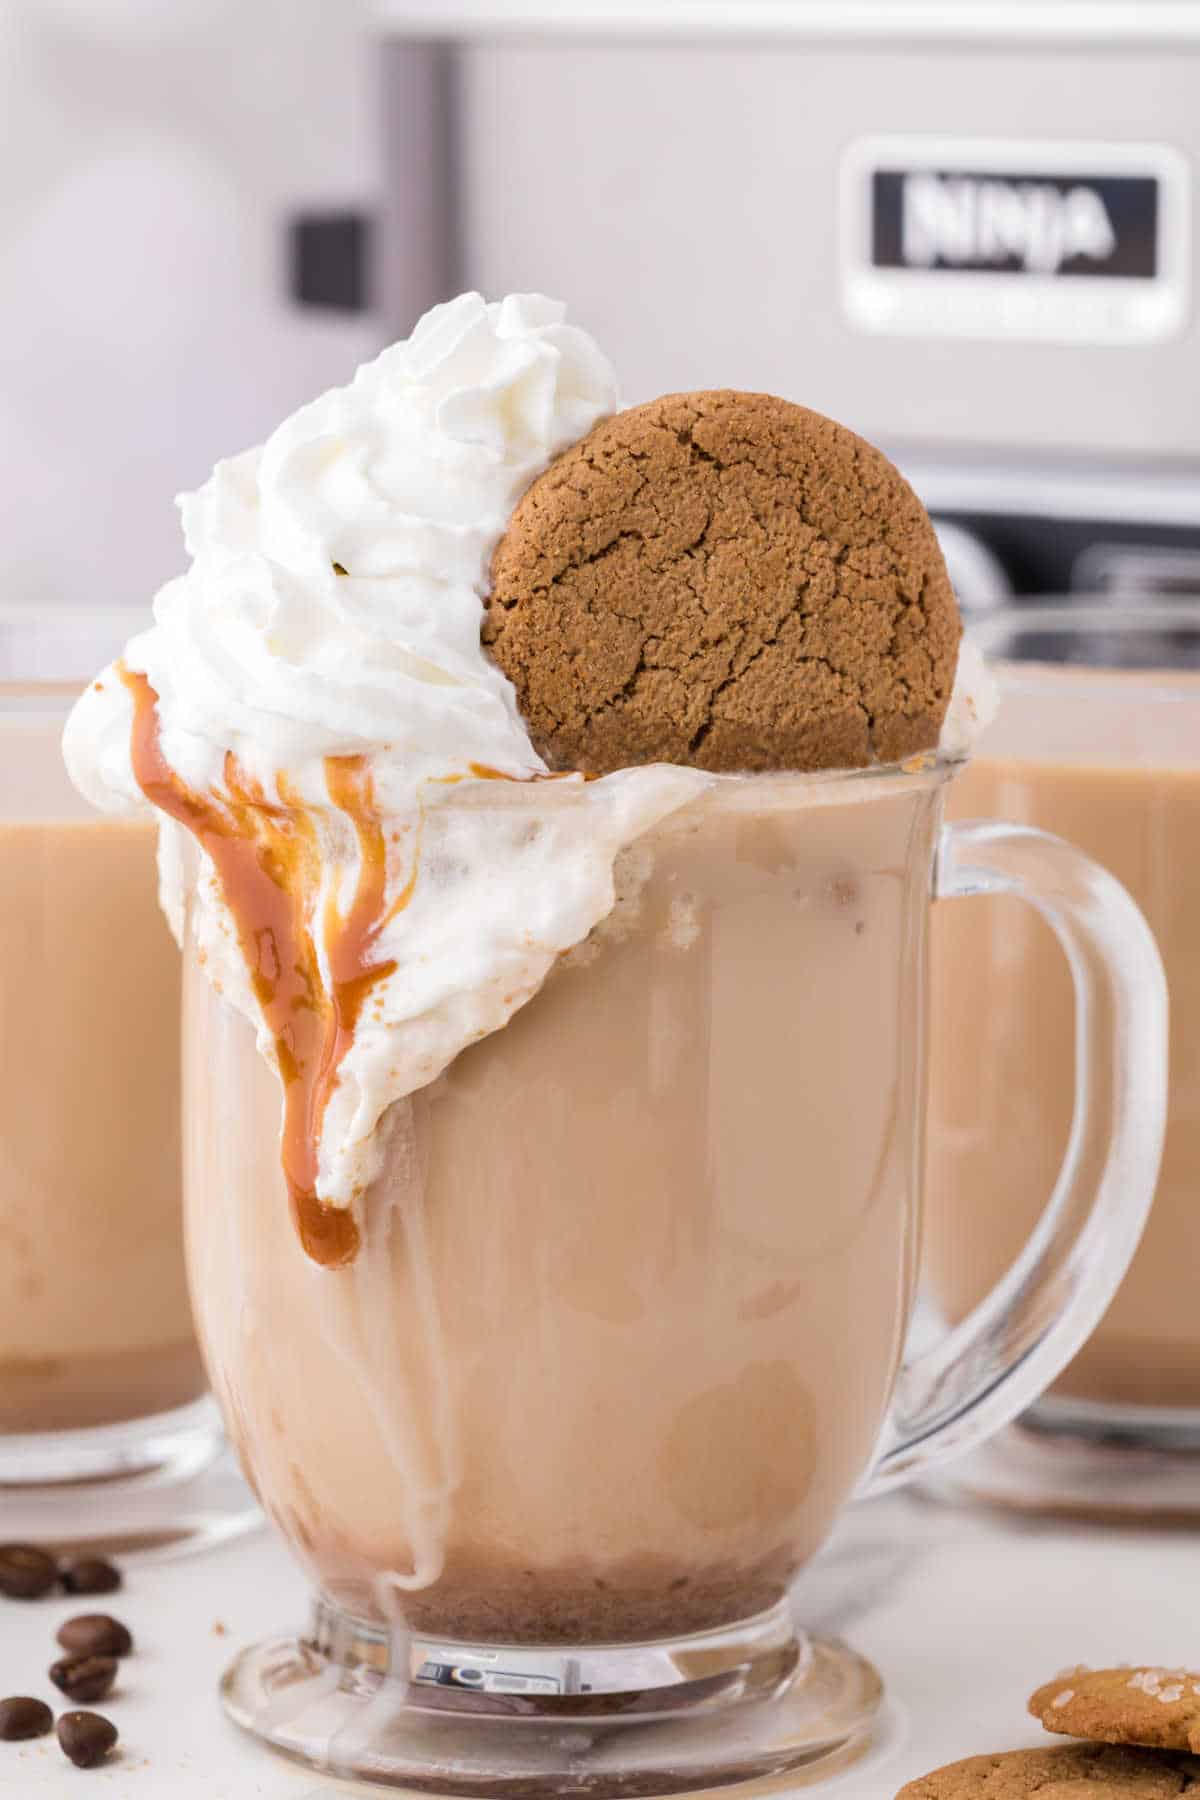 Gingerbread latte with whipped cream and a cookie.